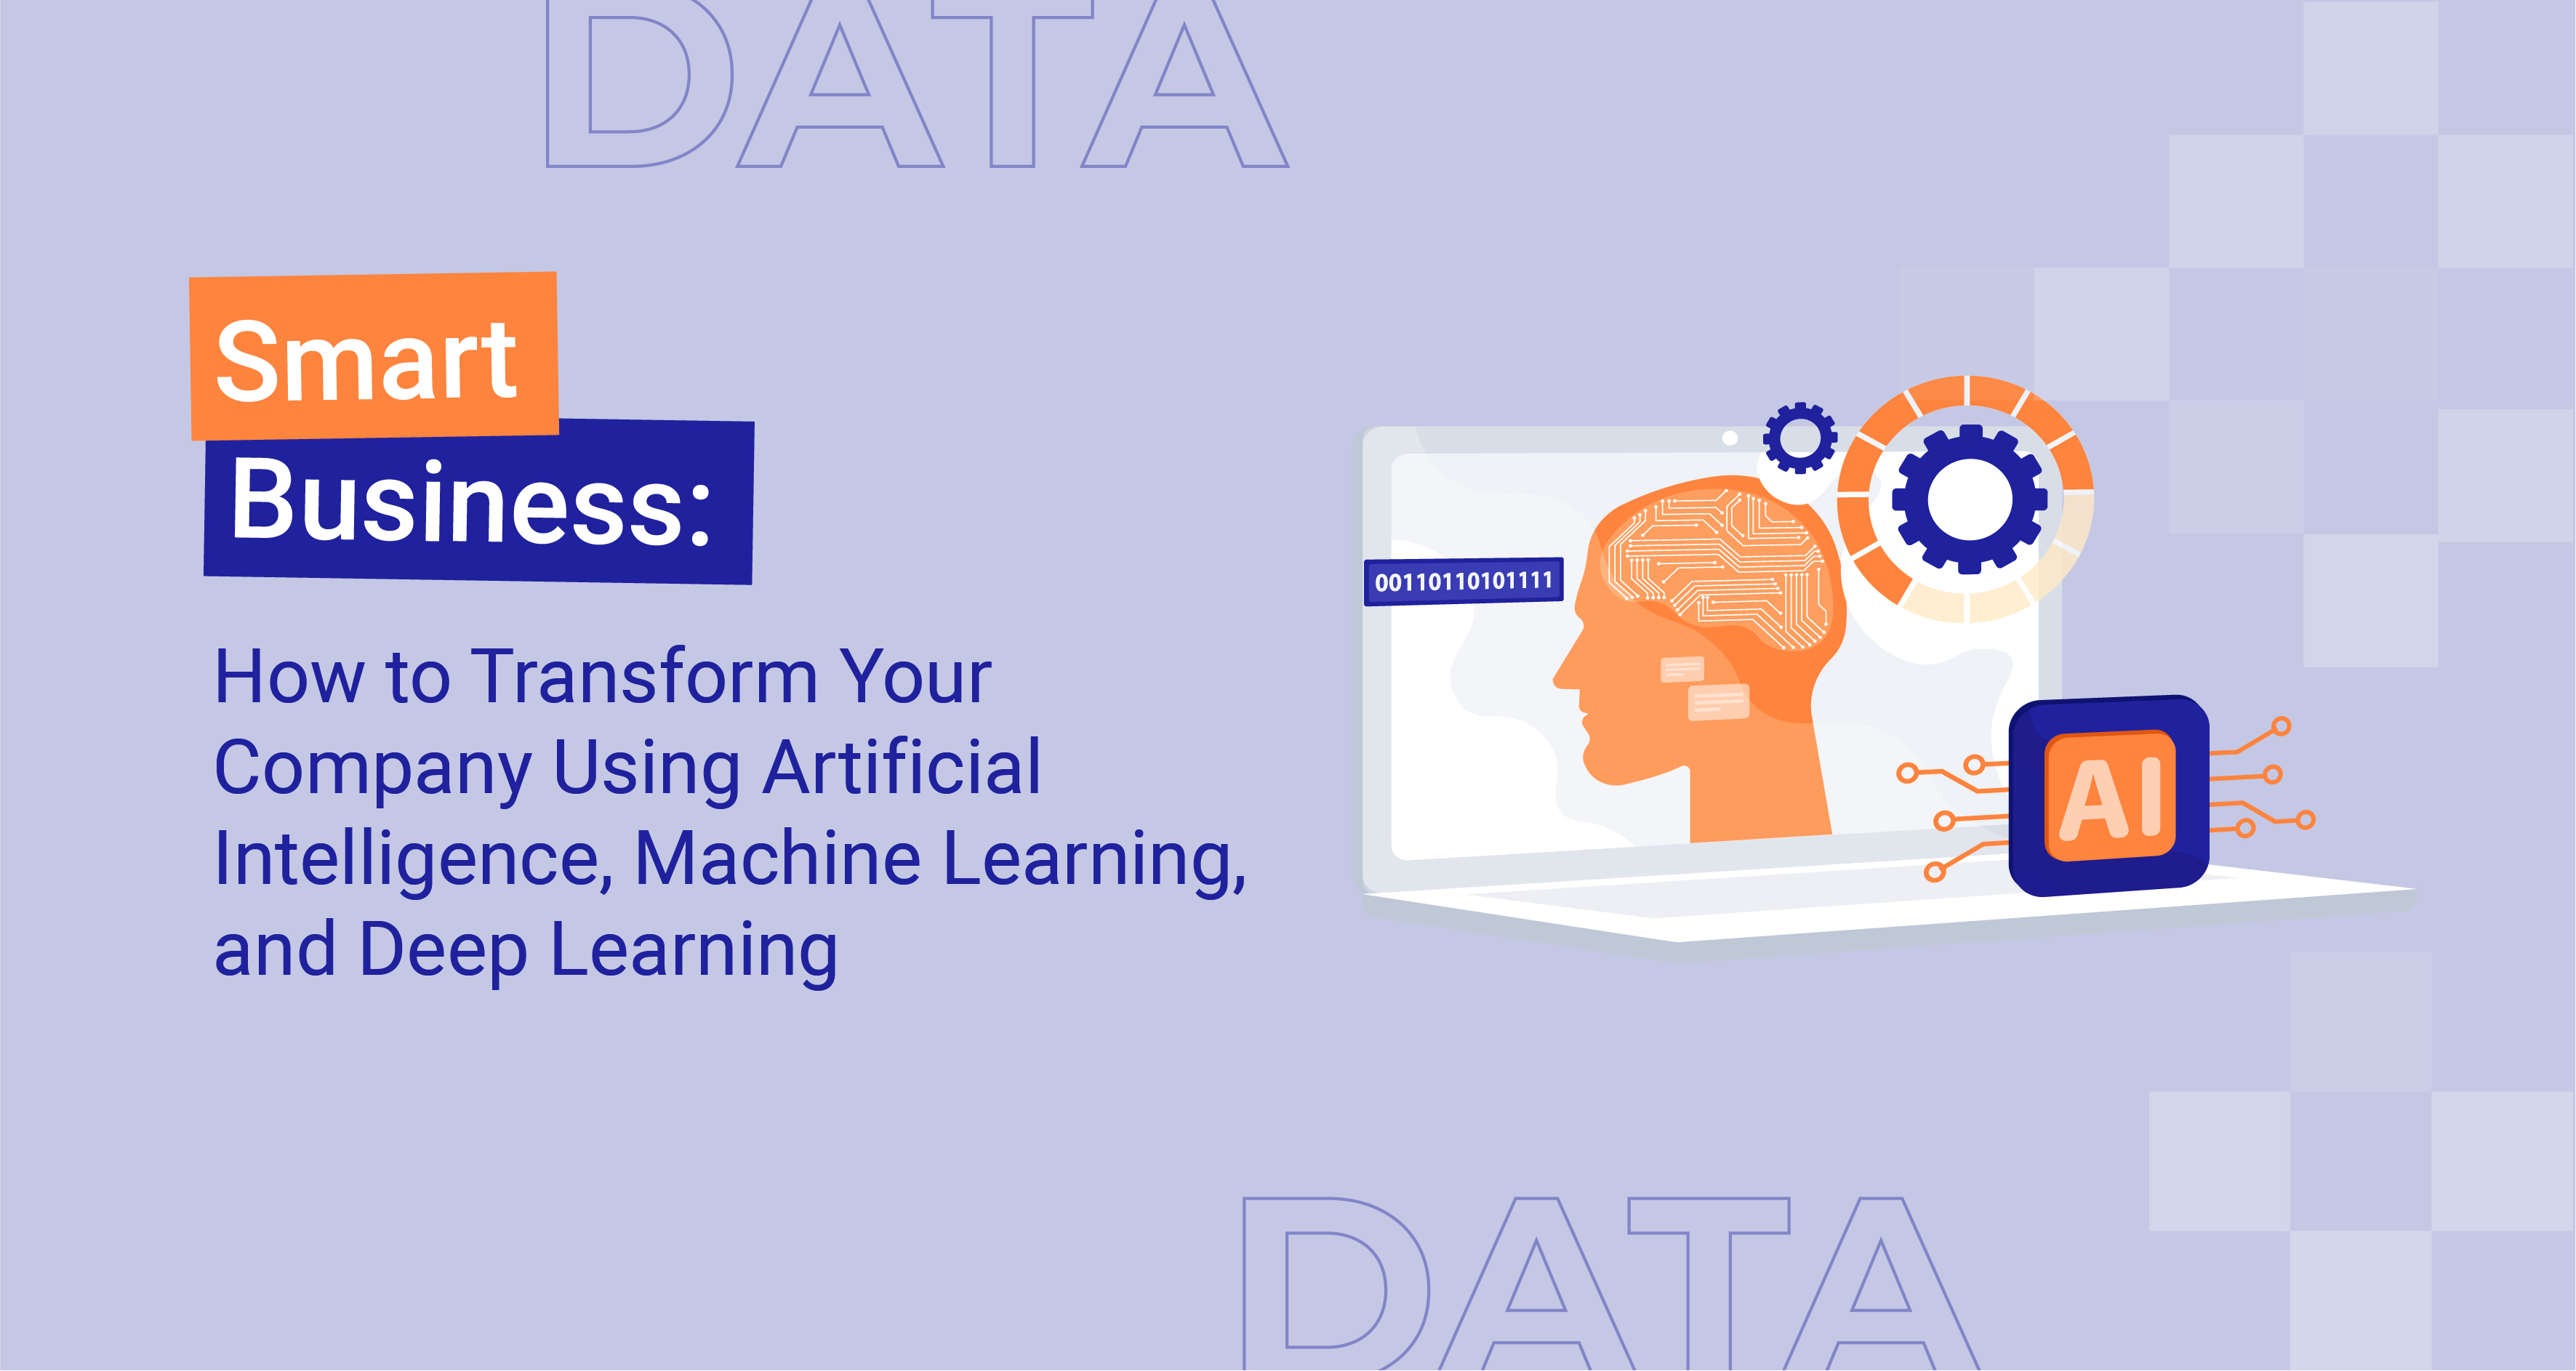 Smart Business: How to Transform Your Company Using Artificial Intelligence, Machine Learning, and Deep Learning